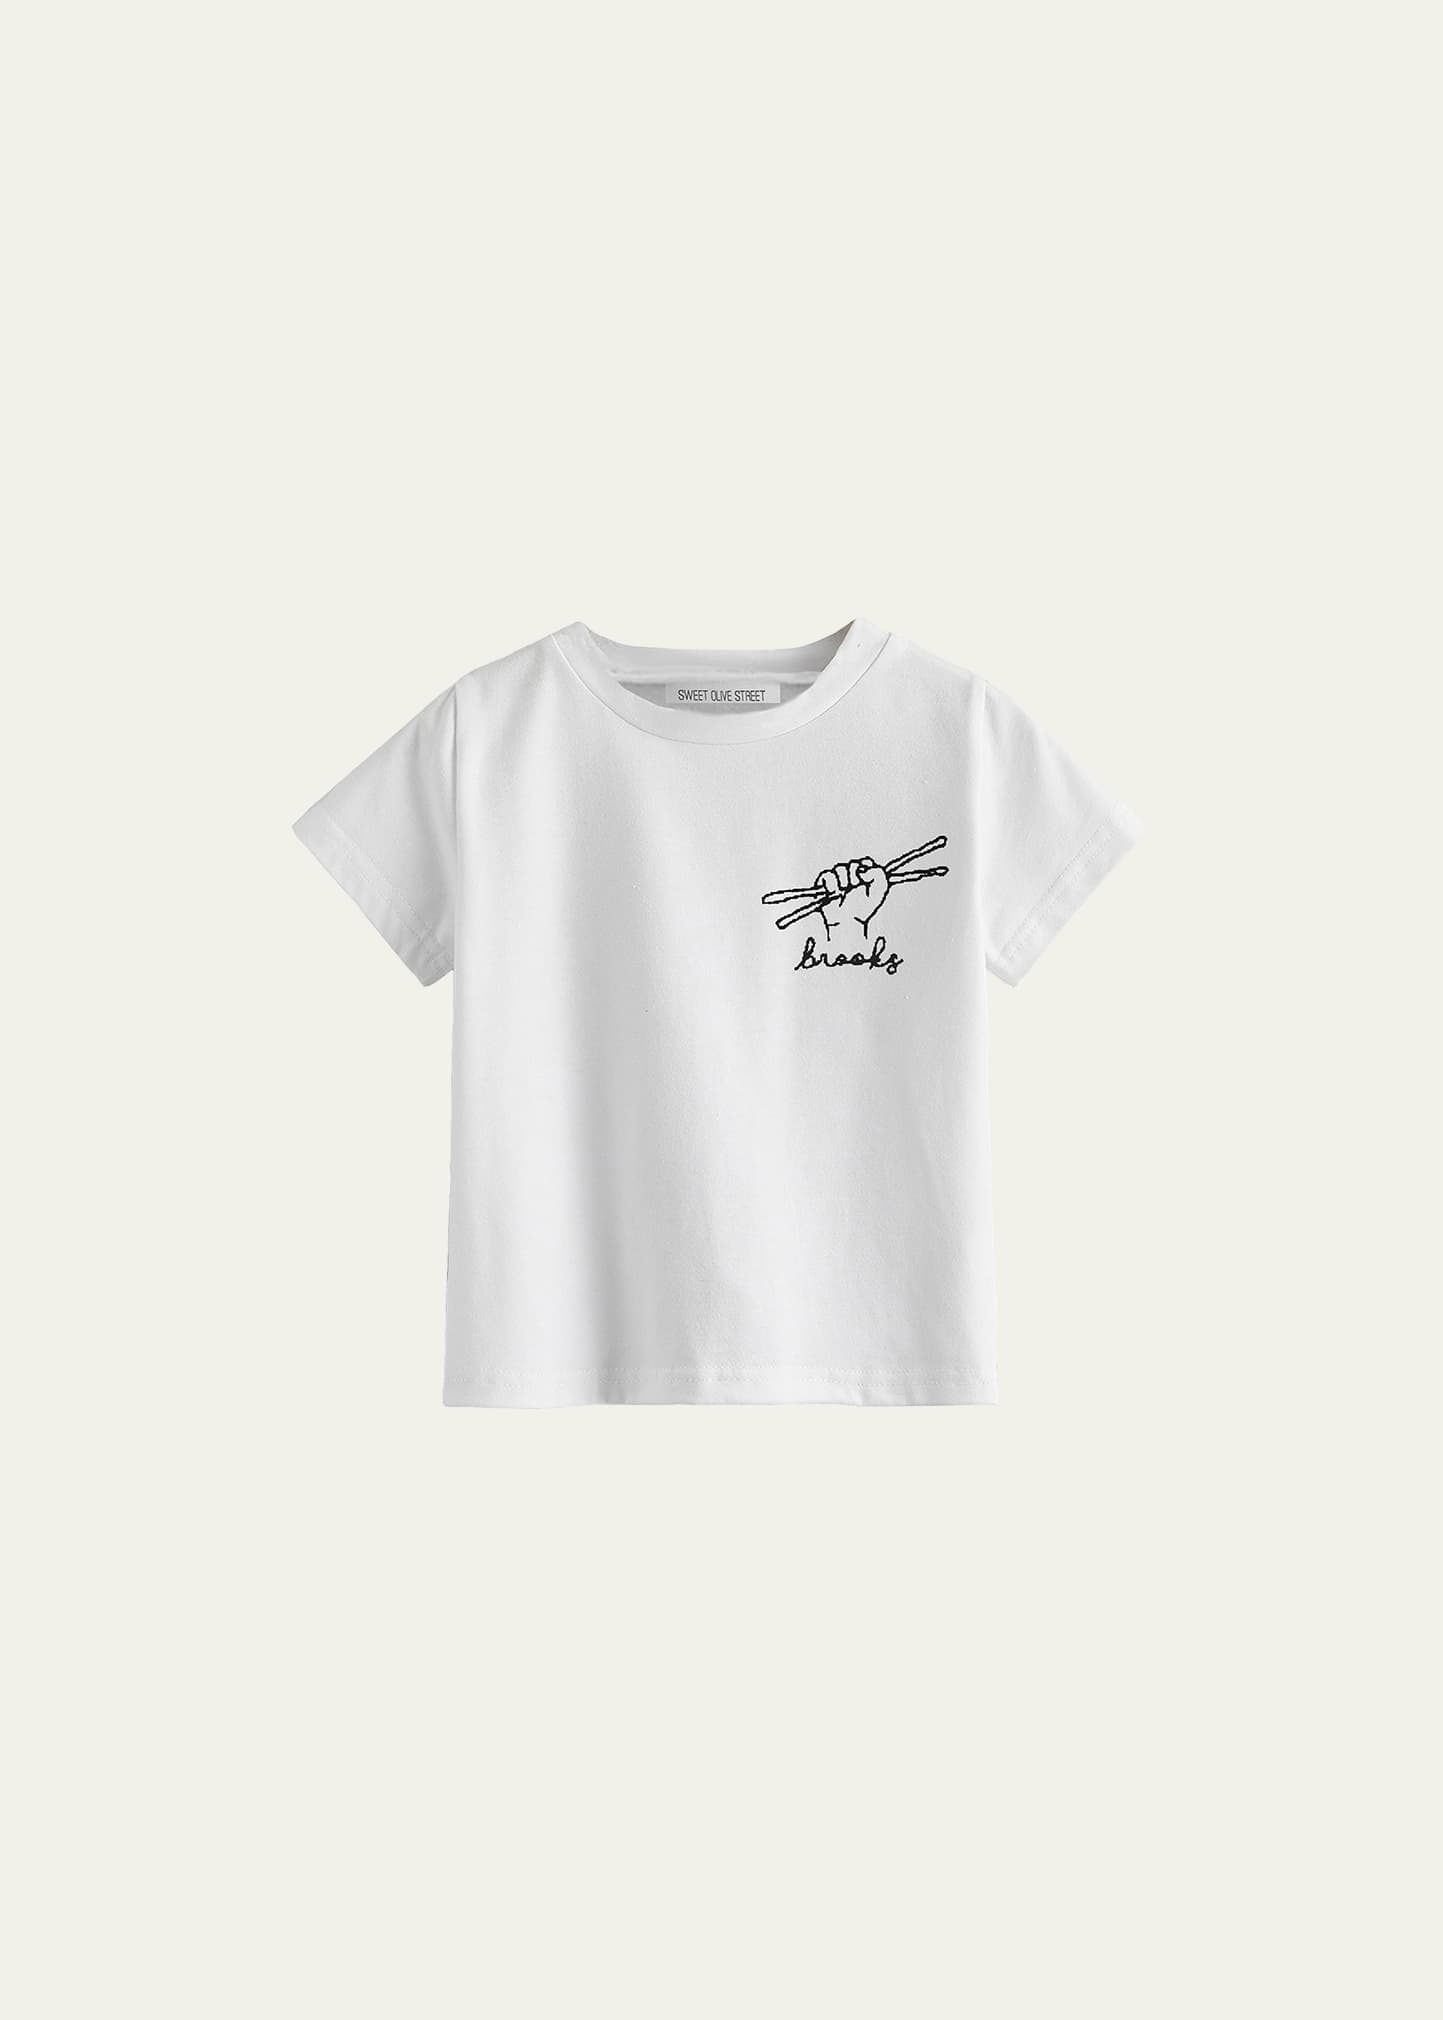 Kid's Surfs Up! Personalized T-Shirt, Sizes XS-L